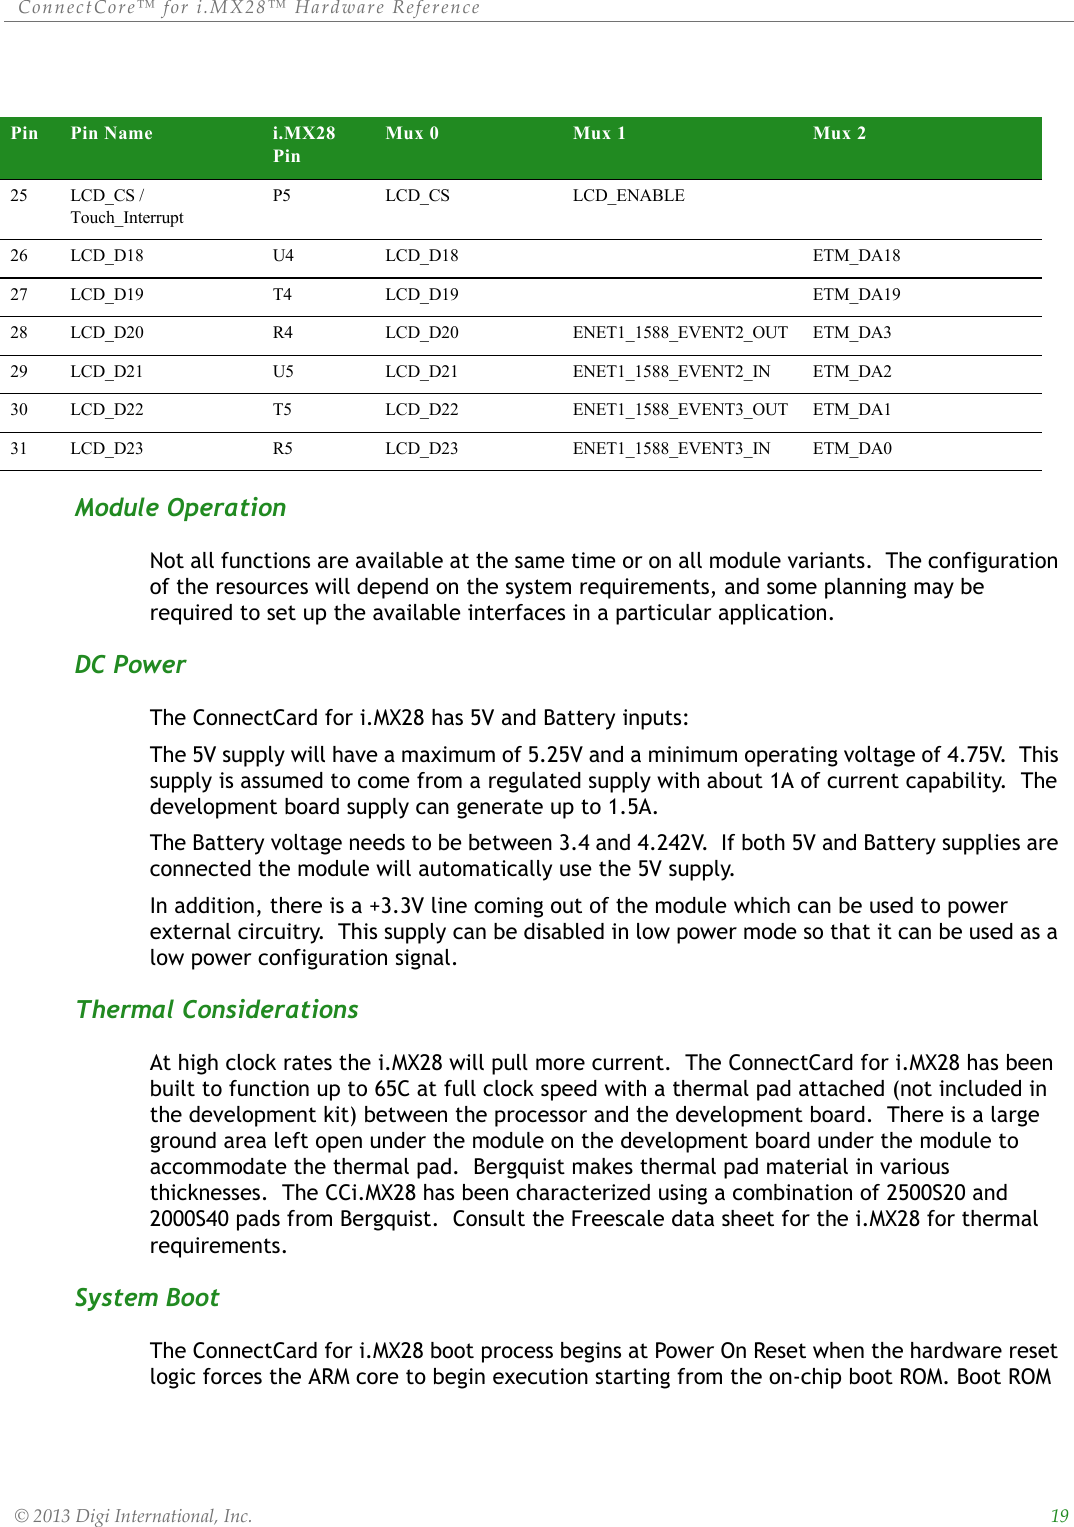 ConnectCore™ for i.MX28™ Hardware Reference  © 2013 Digi International, Inc.      19Module OperationNot all functions are available at the same time or on all module variants.  The configuration of the resources will depend on the system requirements, and some planning may be required to set up the available interfaces in a particular application.DC PowerThe ConnectCard for i.MX28 has 5V and Battery inputs:The 5V supply will have a maximum of 5.25V and a minimum operating voltage of 4.75V.  This supply is assumed to come from a regulated supply with about 1A of current capability.  The development board supply can generate up to 1.5A.The Battery voltage needs to be between 3.4 and 4.242V.  If both 5V and Battery supplies are connected the module will automatically use the 5V supply.In addition, there is a +3.3V line coming out of the module which can be used to power external circuitry.  This supply can be disabled in low power mode so that it can be used as a low power configuration signal.Thermal ConsiderationsAt high clock rates the i.MX28 will pull more current.  The ConnectCard for i.MX28 has been built to function up to 65C at full clock speed with a thermal pad attached (not included in the development kit) between the processor and the development board.  There is a large ground area left open under the module on the development board under the module to accommodate the thermal pad.  Bergquist makes thermal pad material in various thicknesses.  The CCi.MX28 has been characterized using a combination of 2500S20 and 2000S40 pads from Bergquist.  Consult the Freescale data sheet for the i.MX28 for thermal requirements.System BootThe ConnectCard for i.MX28 boot process begins at Power On Reset when the hardware reset logic forces the ARM core to begin execution starting from the on-chip boot ROM. Boot ROM 25 LCD_CS / Touch_InterruptP5 LCD_CS LCD_ENABLE26 LCD_D18 U4 LCD_D18 ETM_DA1827 LCD_D19 T4 LCD_D19 ETM_DA1928 LCD_D20 R4 LCD_D20 ENET1_1588_EVENT2_OUT ETM_DA329 LCD_D21 U5 LCD_D21 ENET1_1588_EVENT2_IN ETM_DA230 LCD_D22 T5 LCD_D22 ENET1_1588_EVENT3_OUT ETM_DA131 LCD_D23 R5 LCD_D23 ENET1_1588_EVENT3_IN ETM_DA0Pin Pin Name i.MX28 PinMux 0 Mux 1 Mux 2